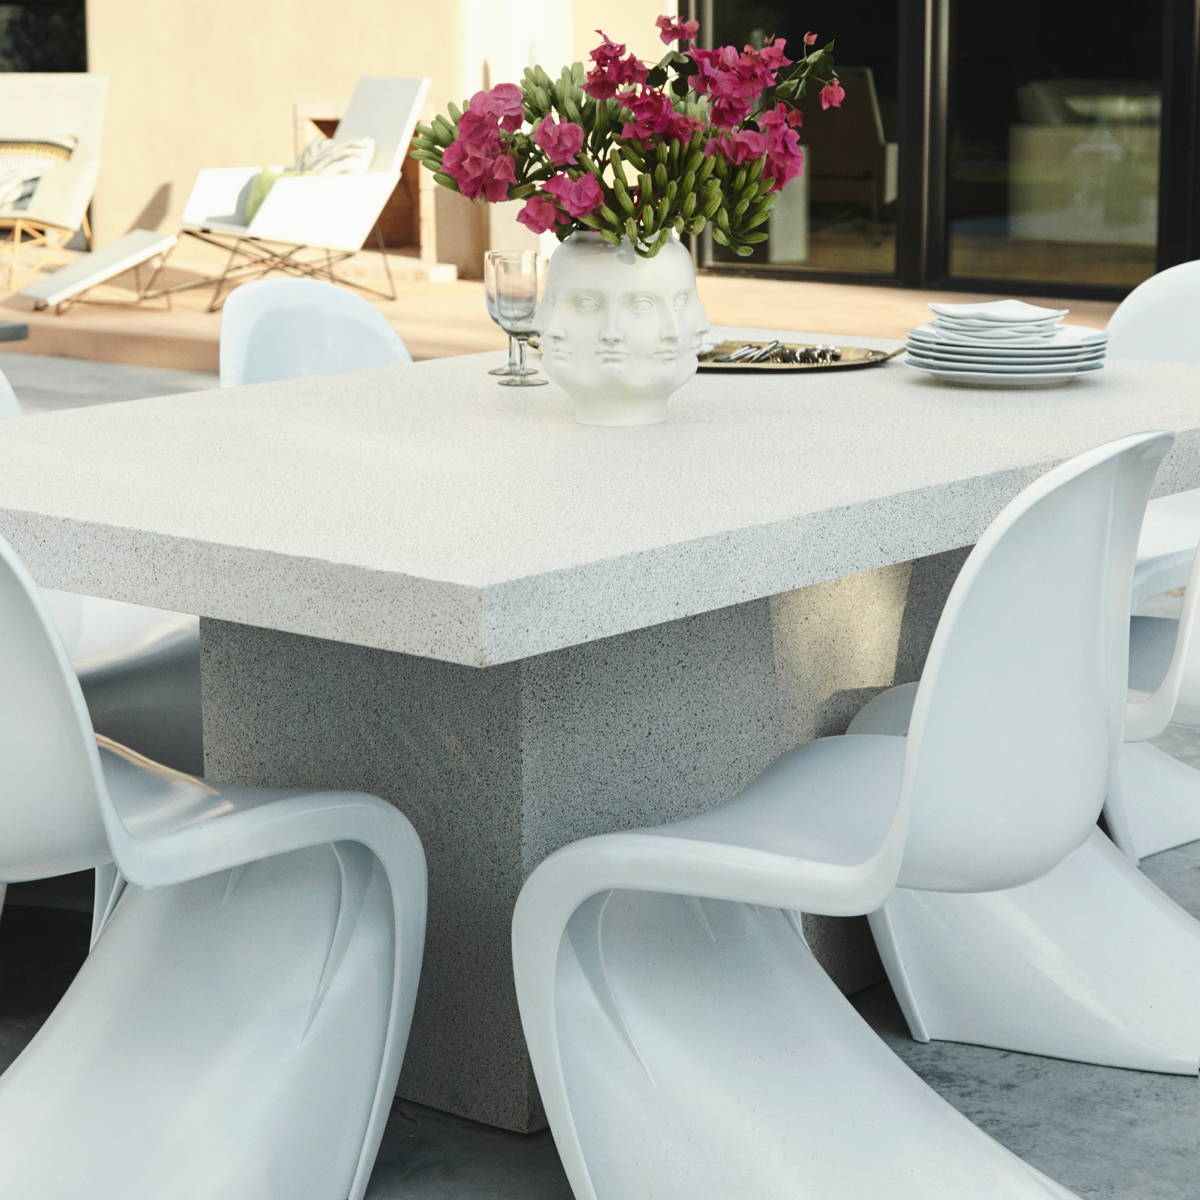 Modern lightweight concrete table with curved white chairs and a centerpiece pot adorned in faces and filled with pink flowers.